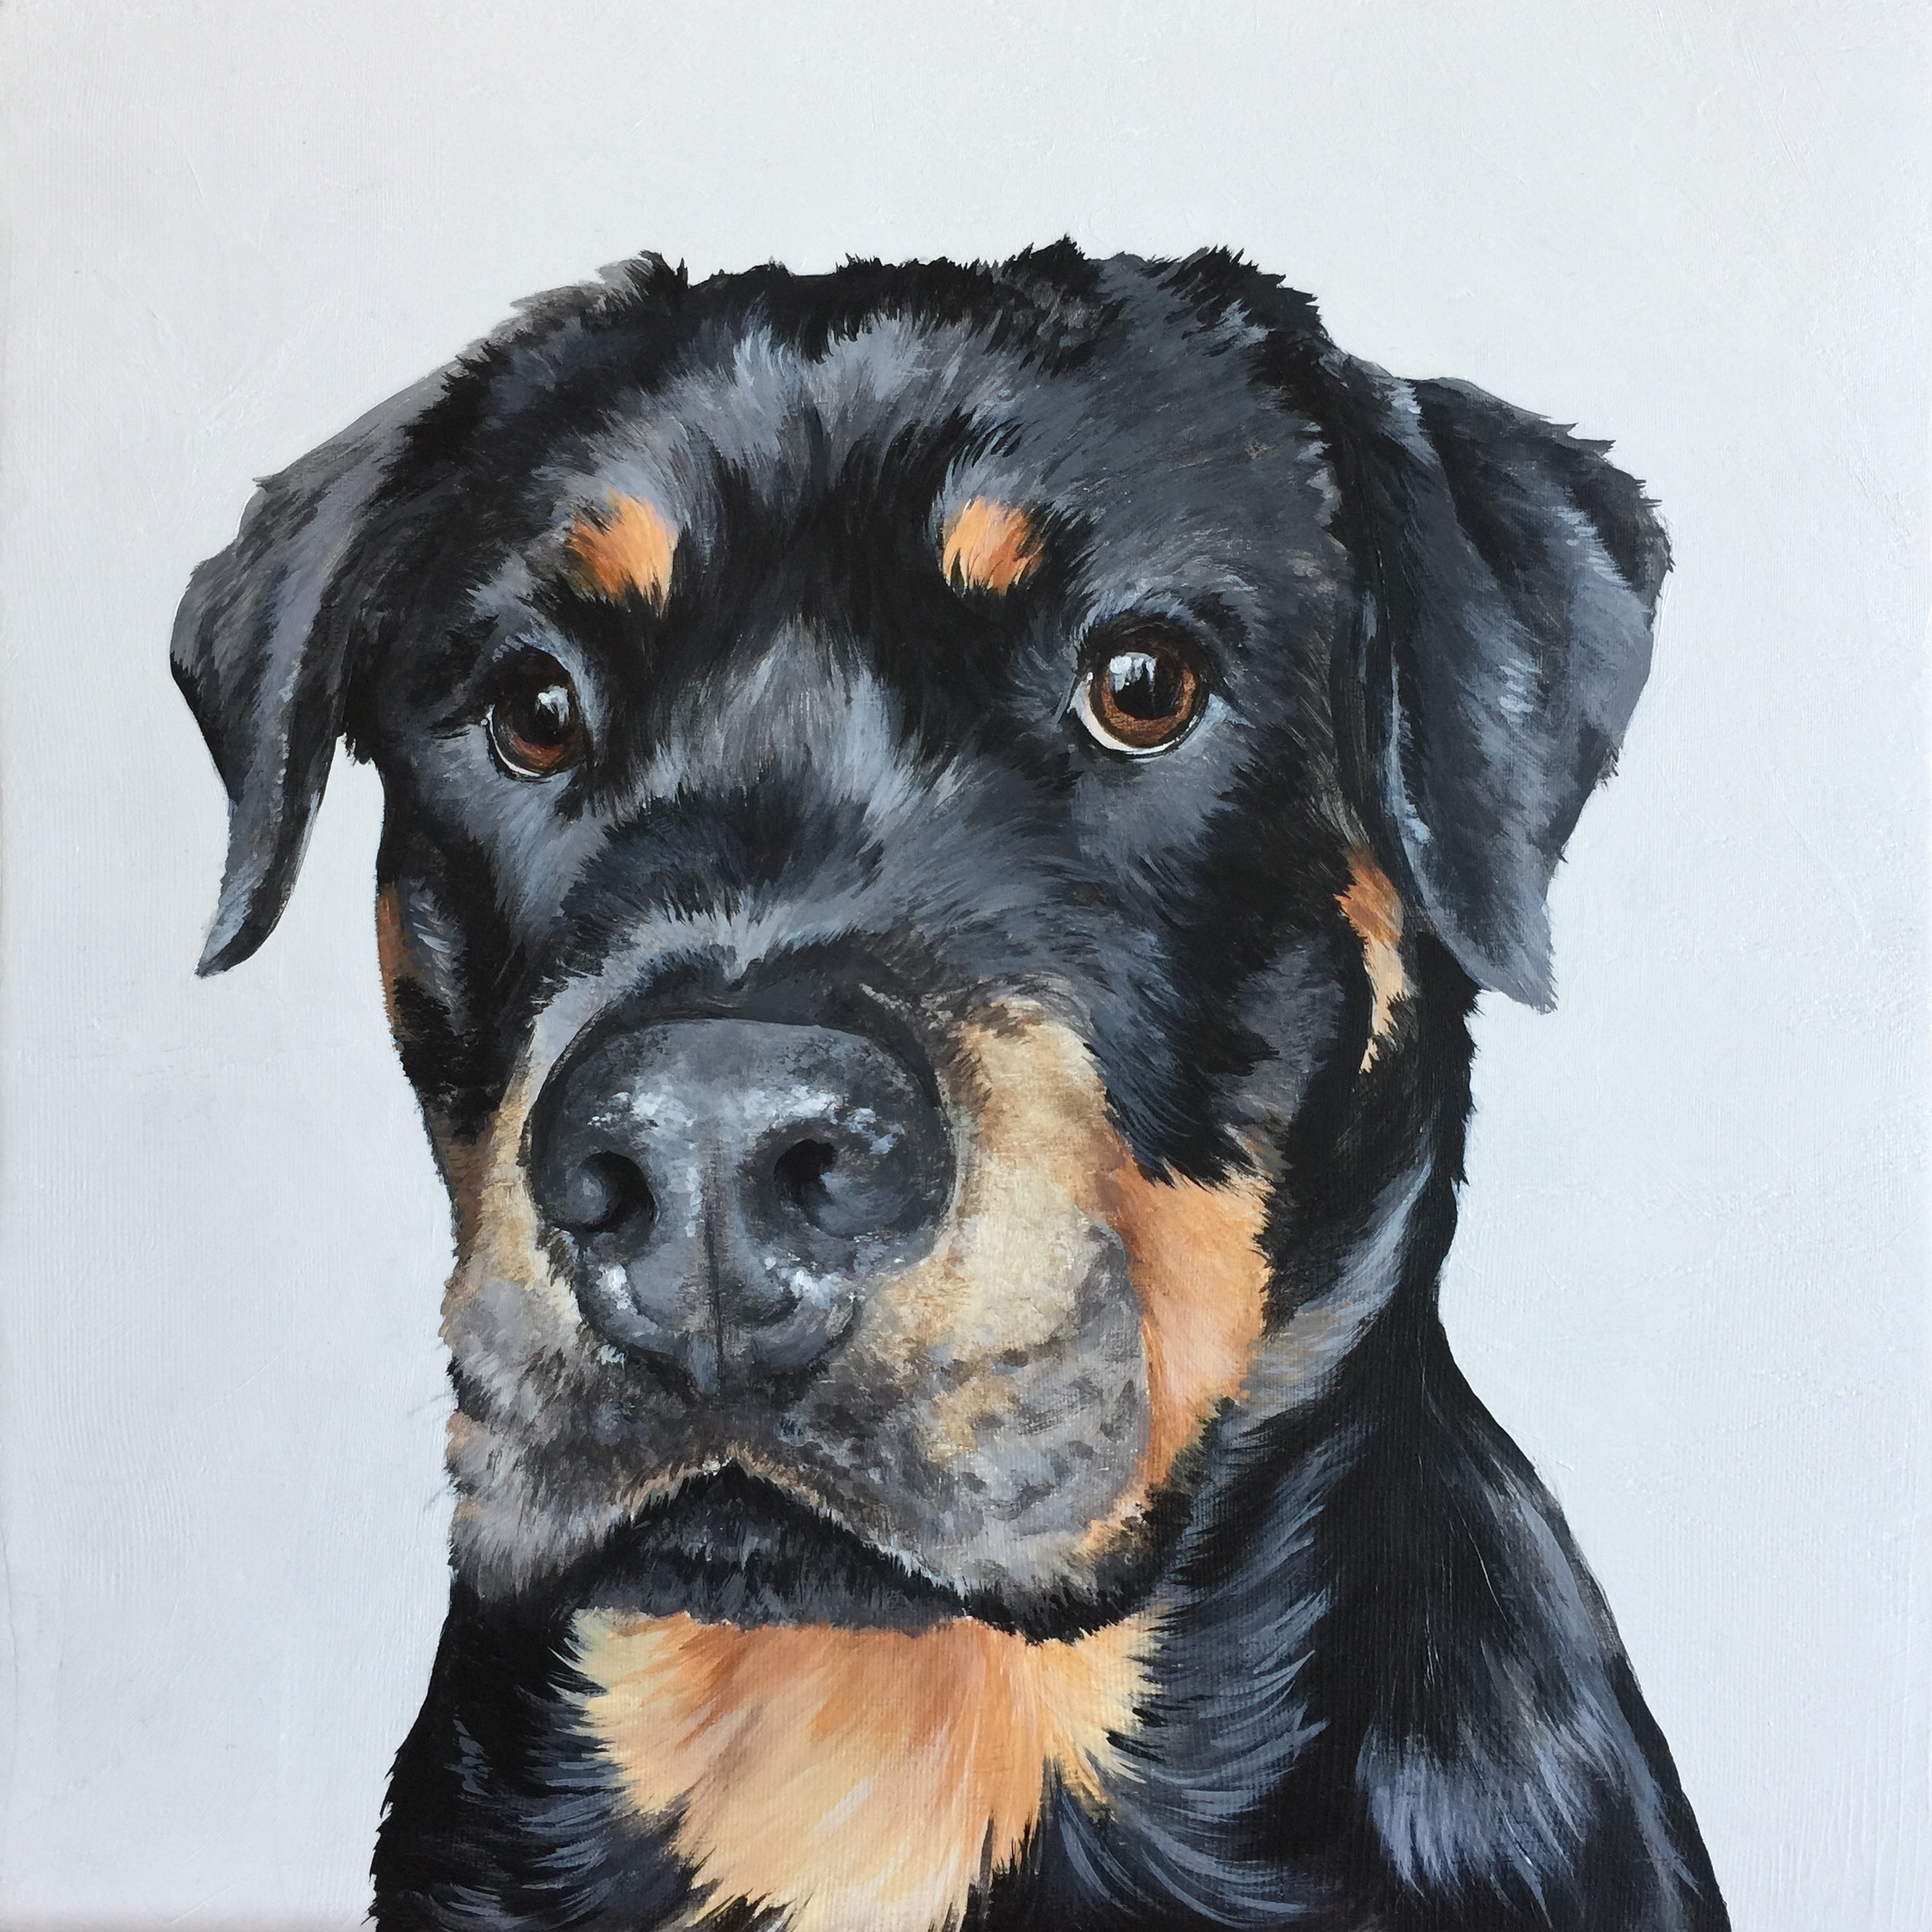  Brody the Rottie - commissioned by Susie 